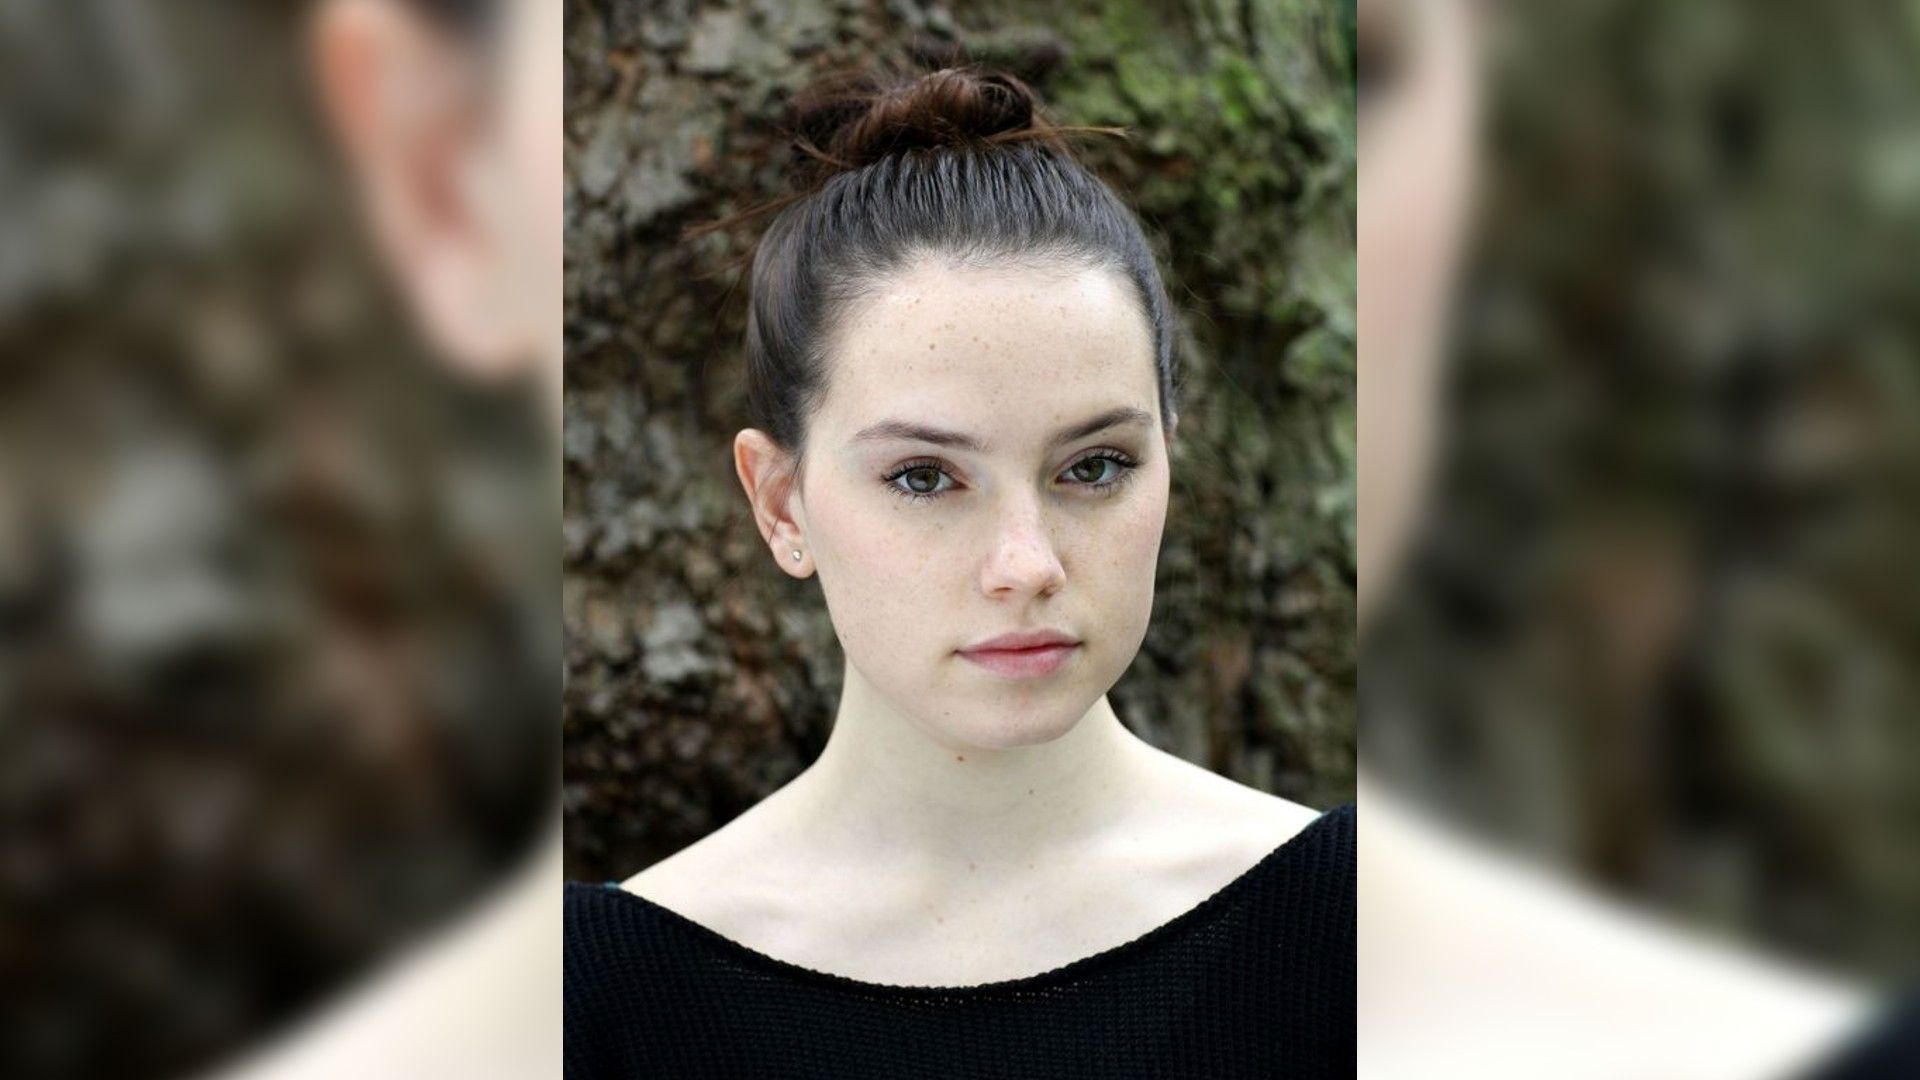 Daisy Ridley in her youth